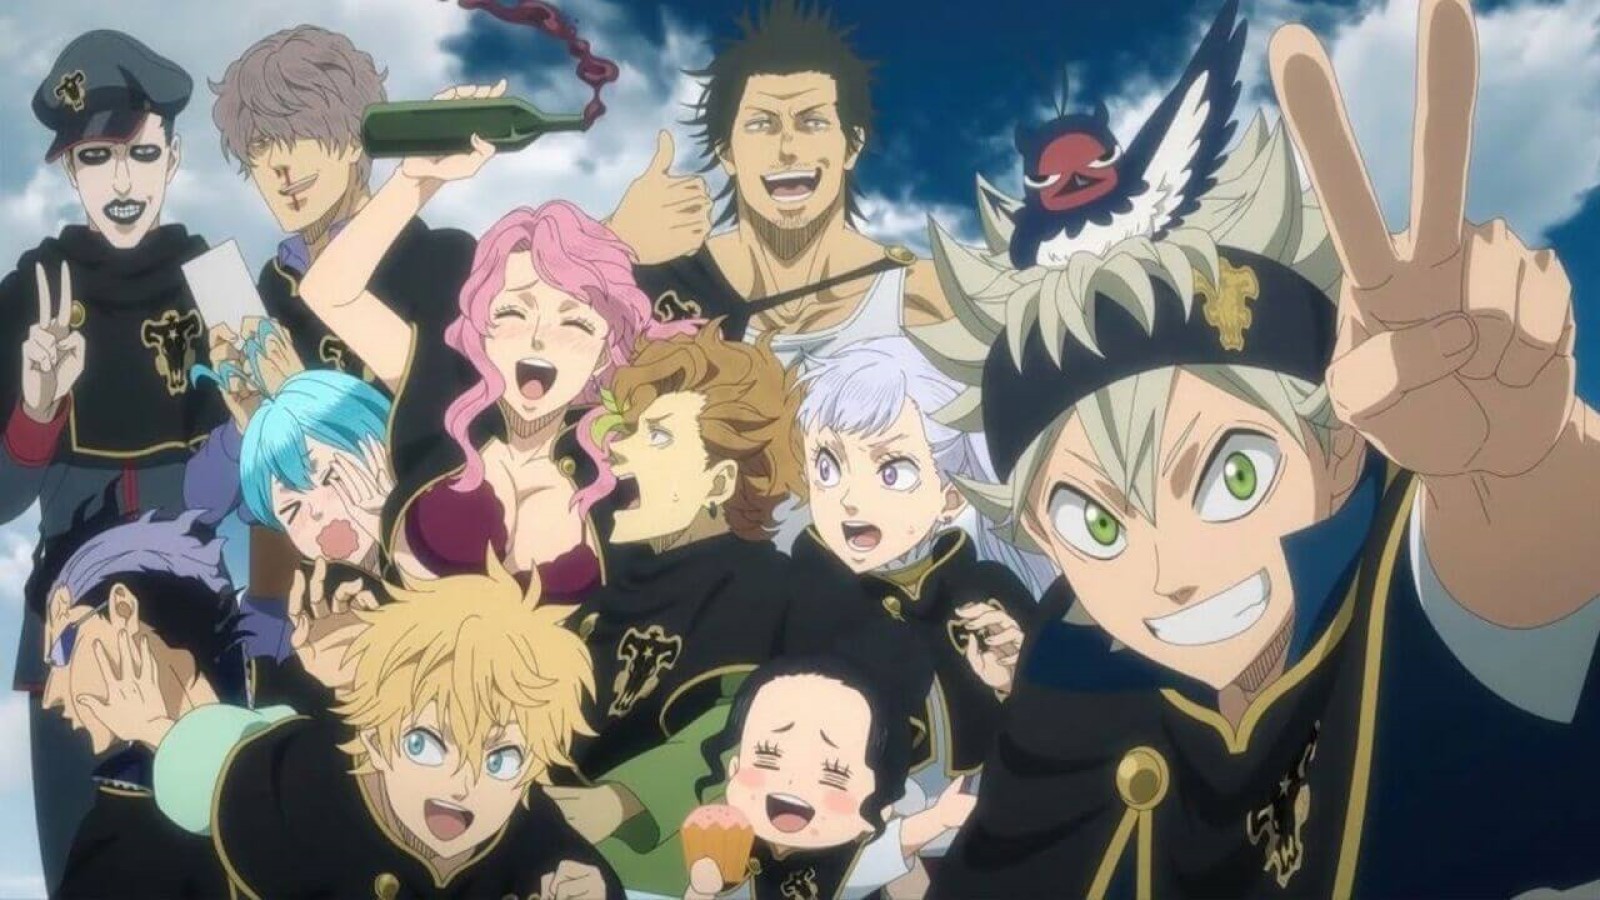 Watch Black Clover Season 1 3 Dub Sub Online Technadu Soul eater is an anime that centers around meisters and their weapons and their mission to collect 99 evil souls and 1 witch soul. watch black clover season 1 3 dub